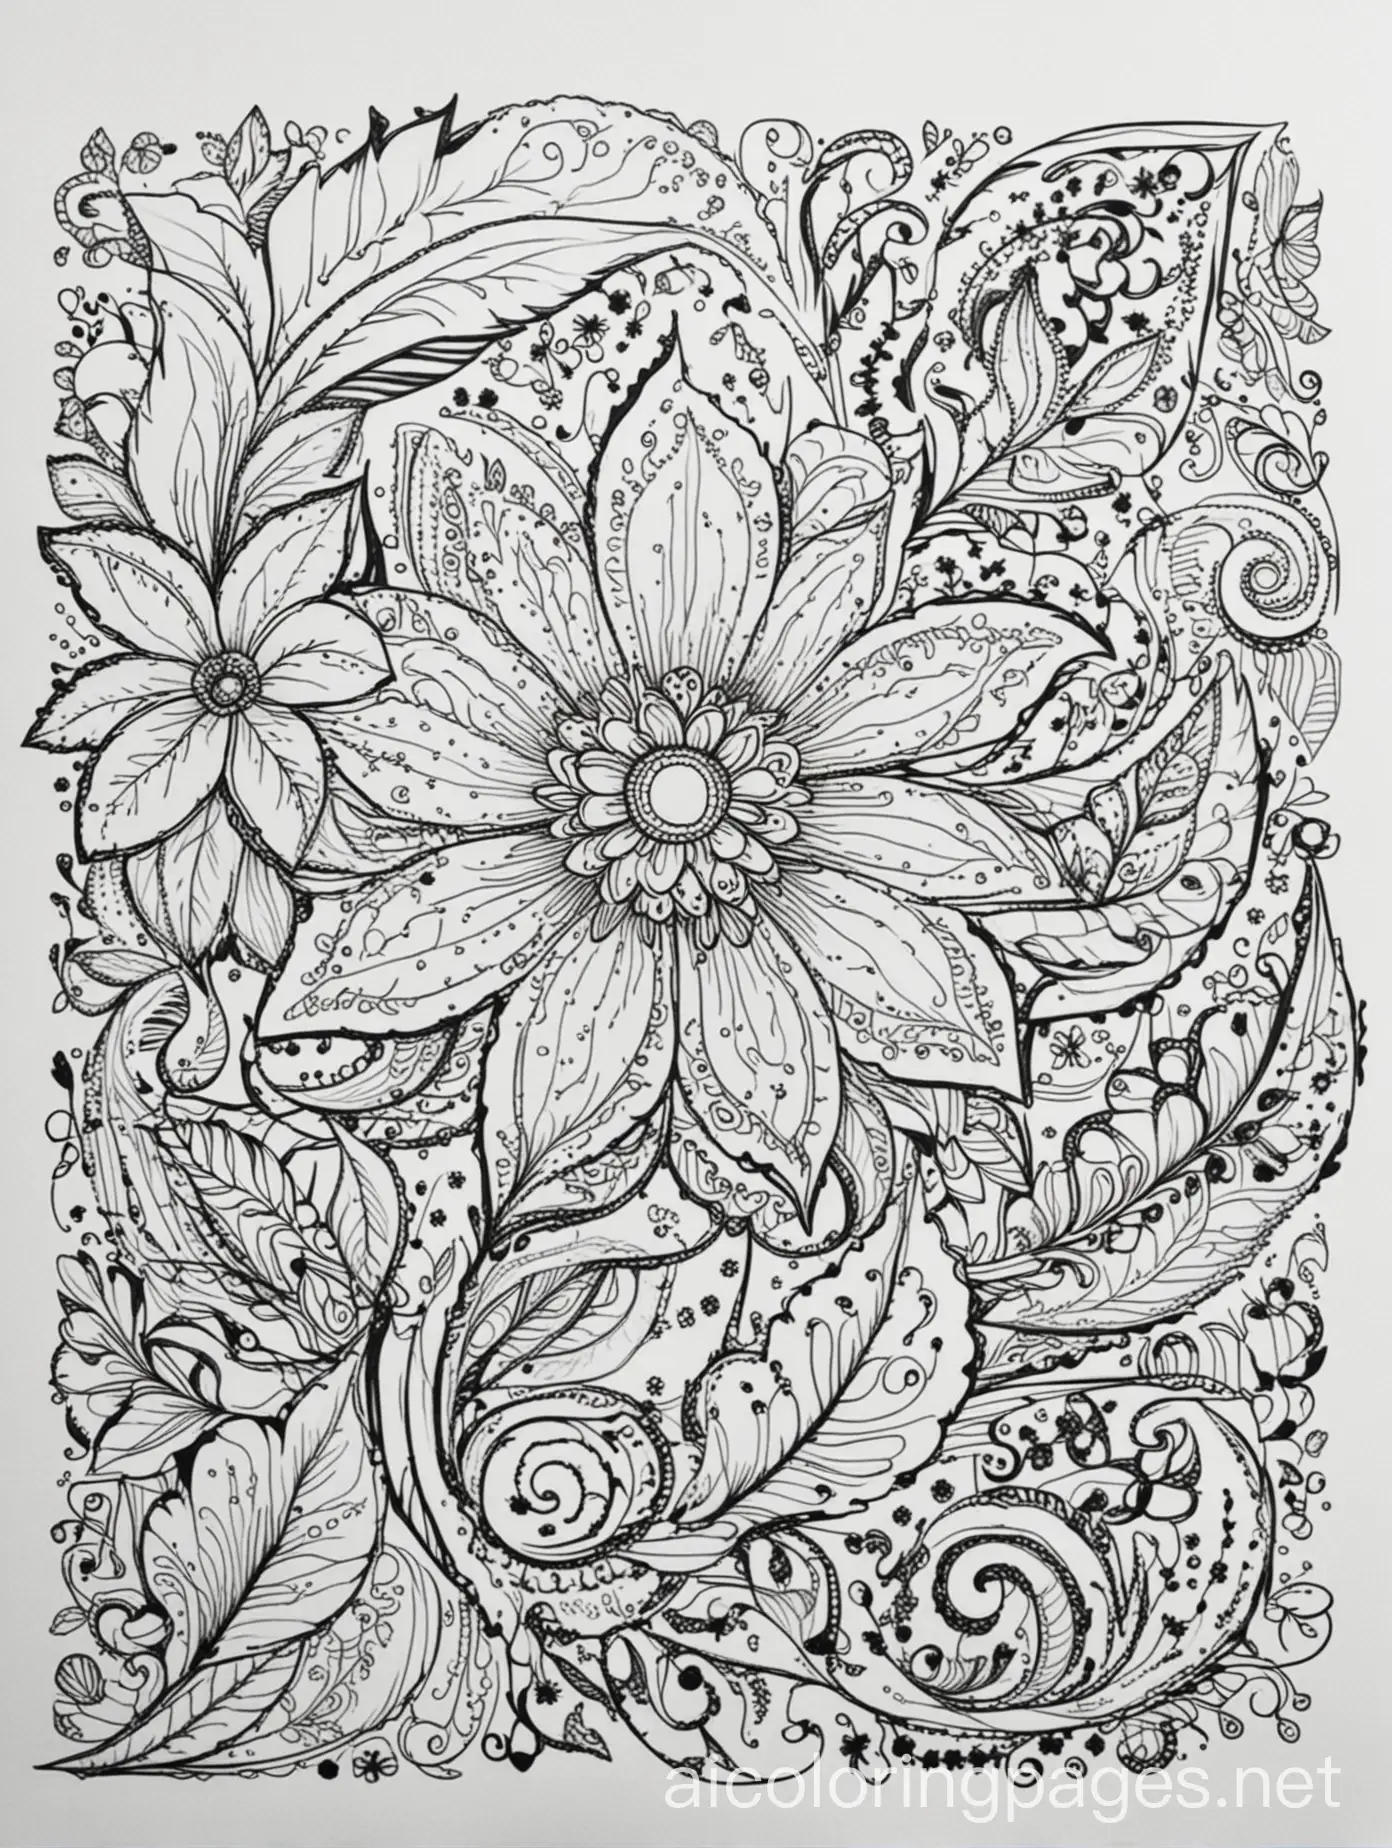 Simple-Flower-Coloring-Page-for-Kids-Black-and-White-Line-Art-with-Ample-White-Space